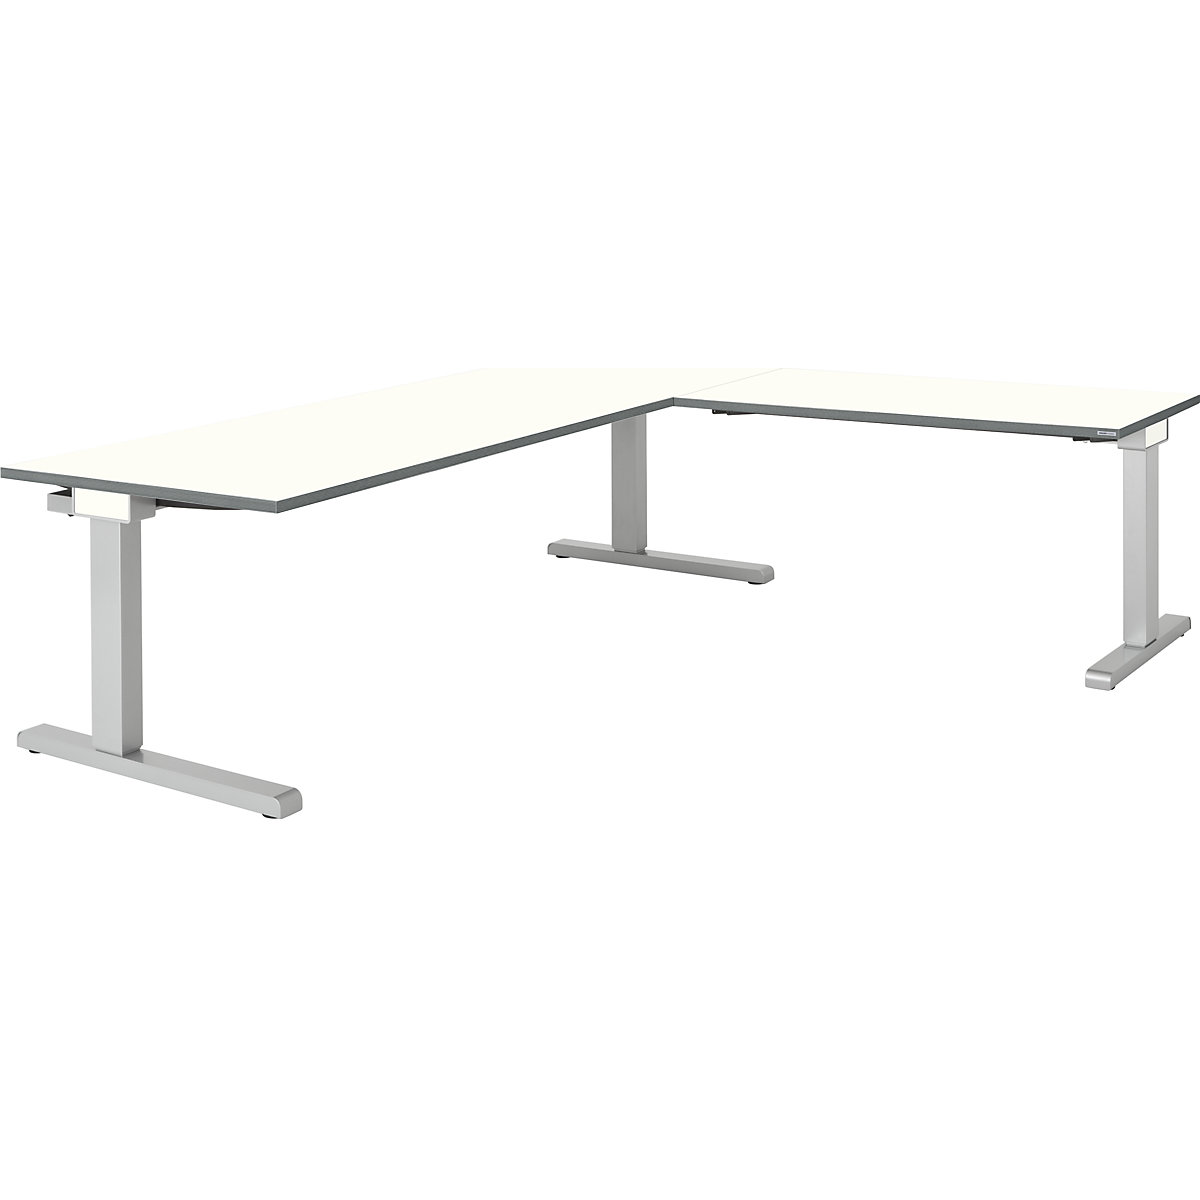 Desk, interlinked – mauser, WxD 2000 x 800 mm, angled extension on right (width 1200 mm), white top, white aluminium frame-2